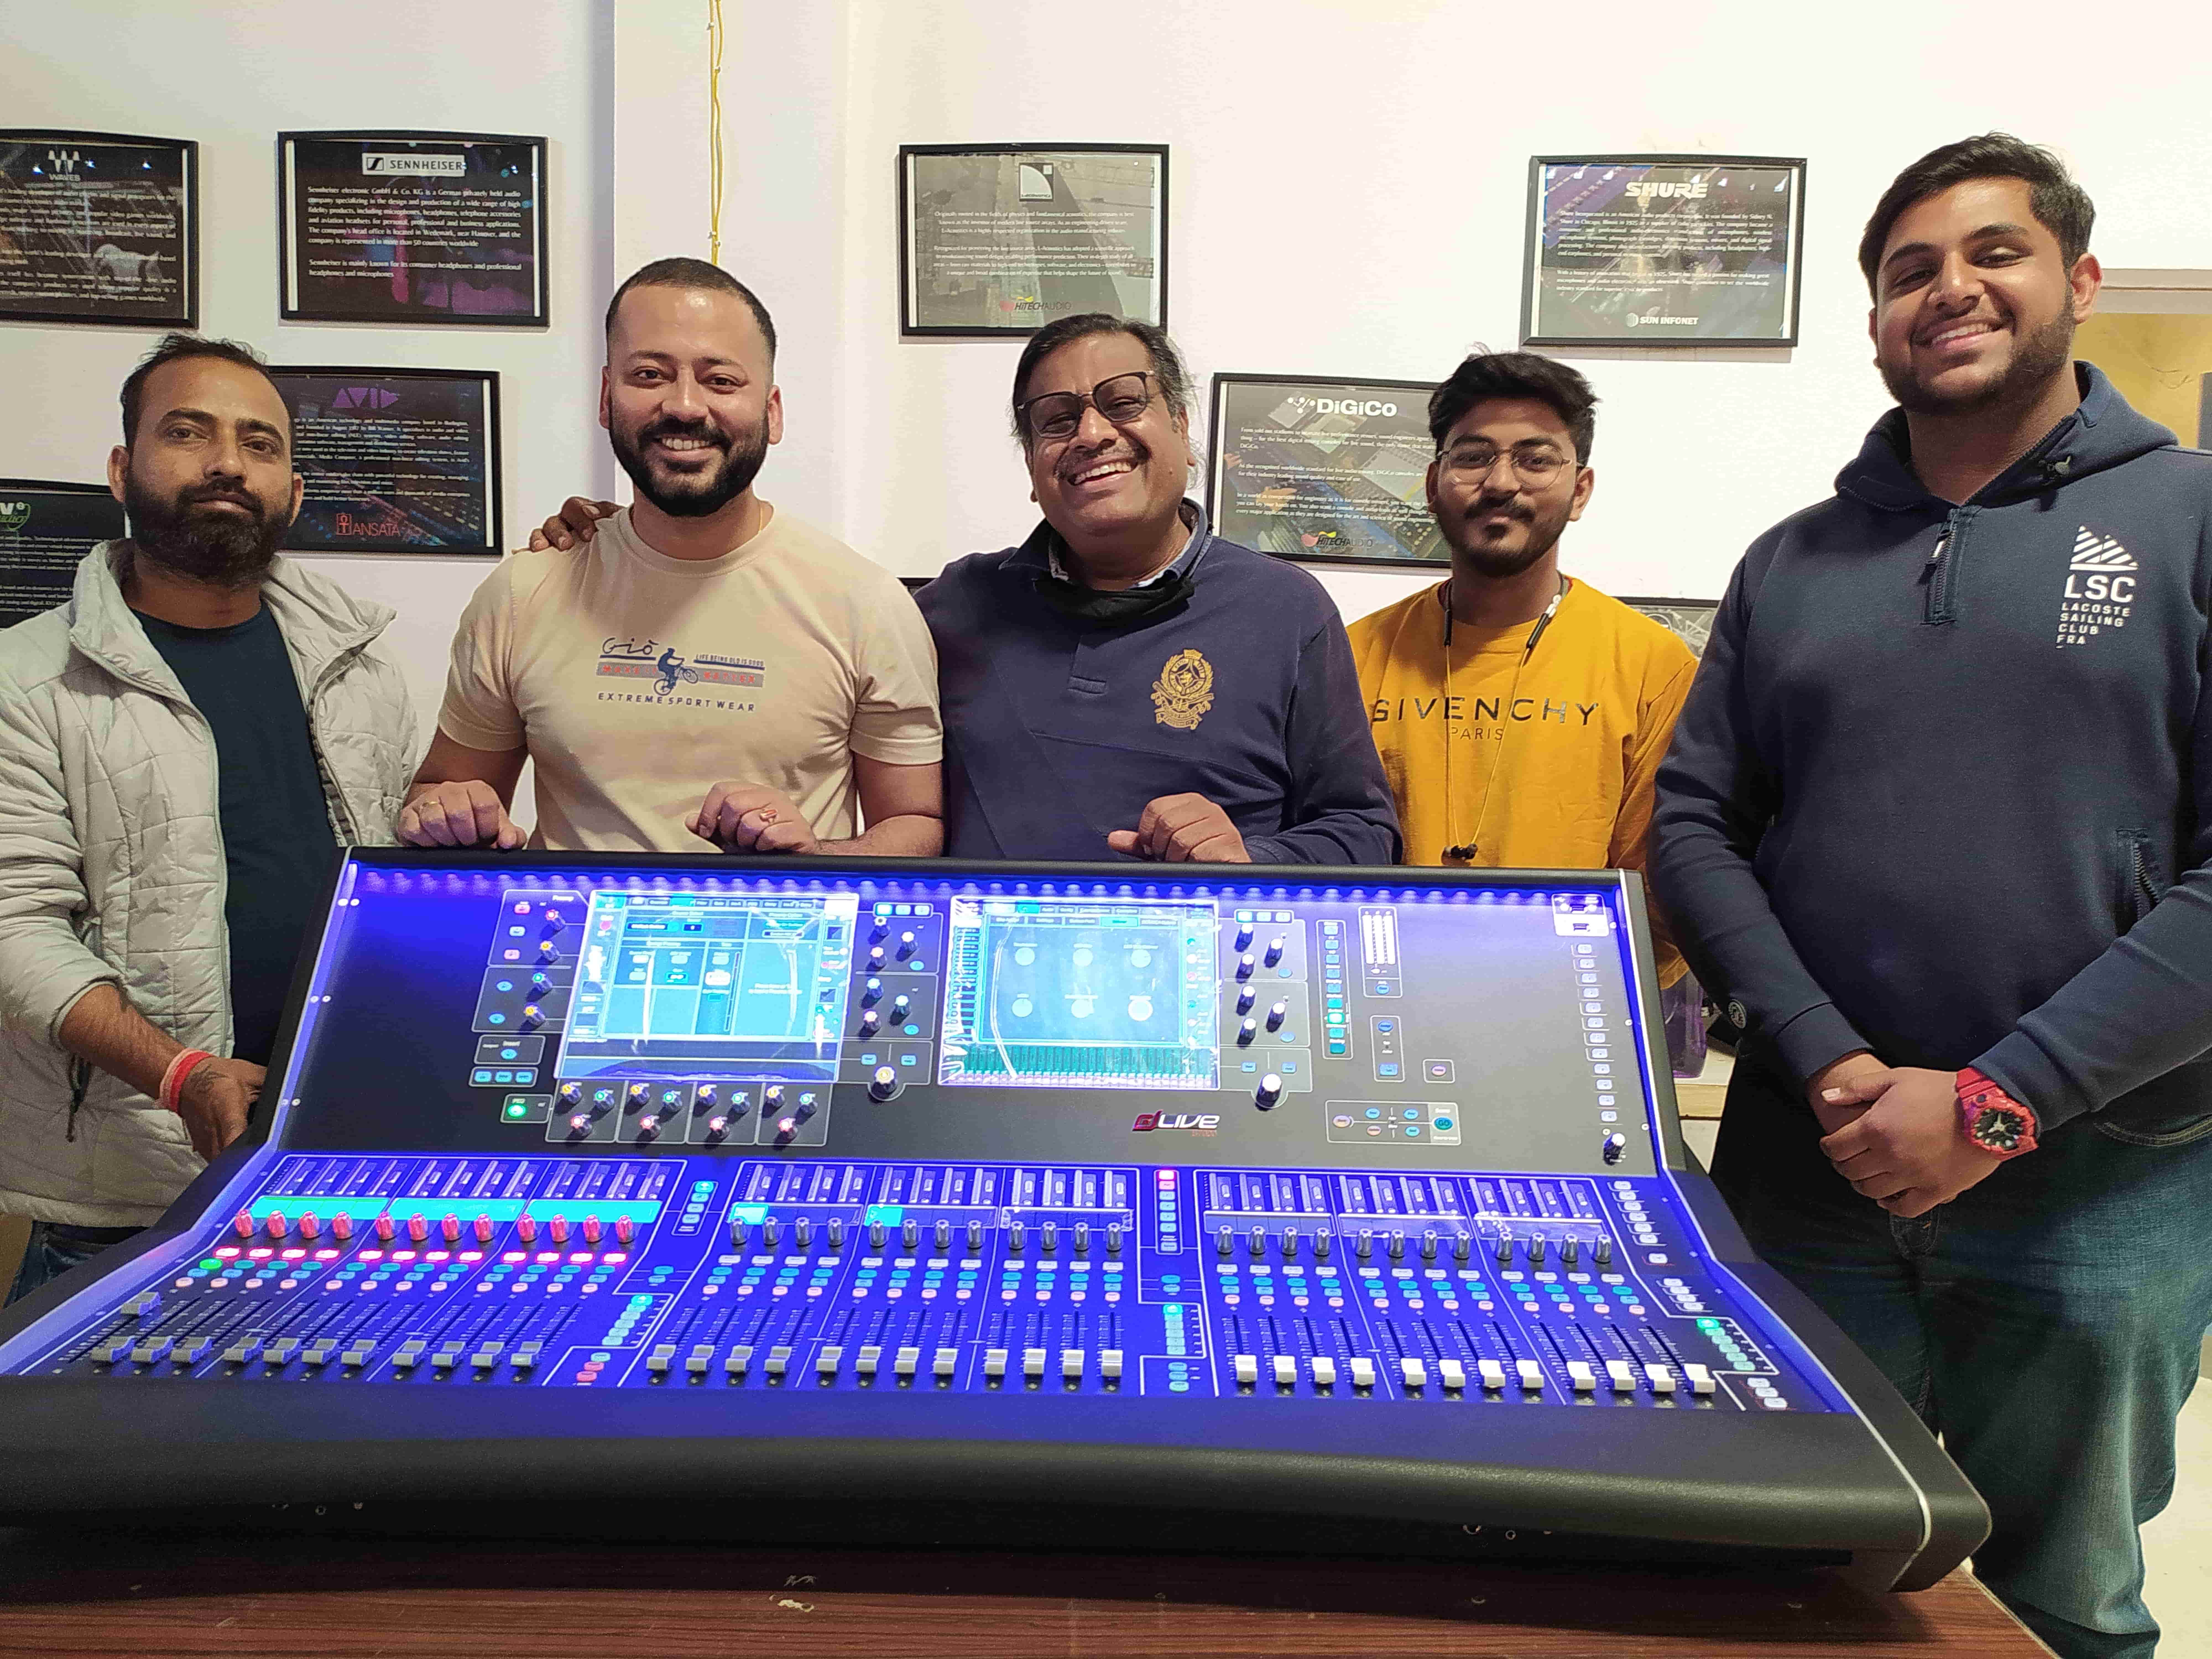 LED Solutions team with Allen & Heath, dLive audio mixing system